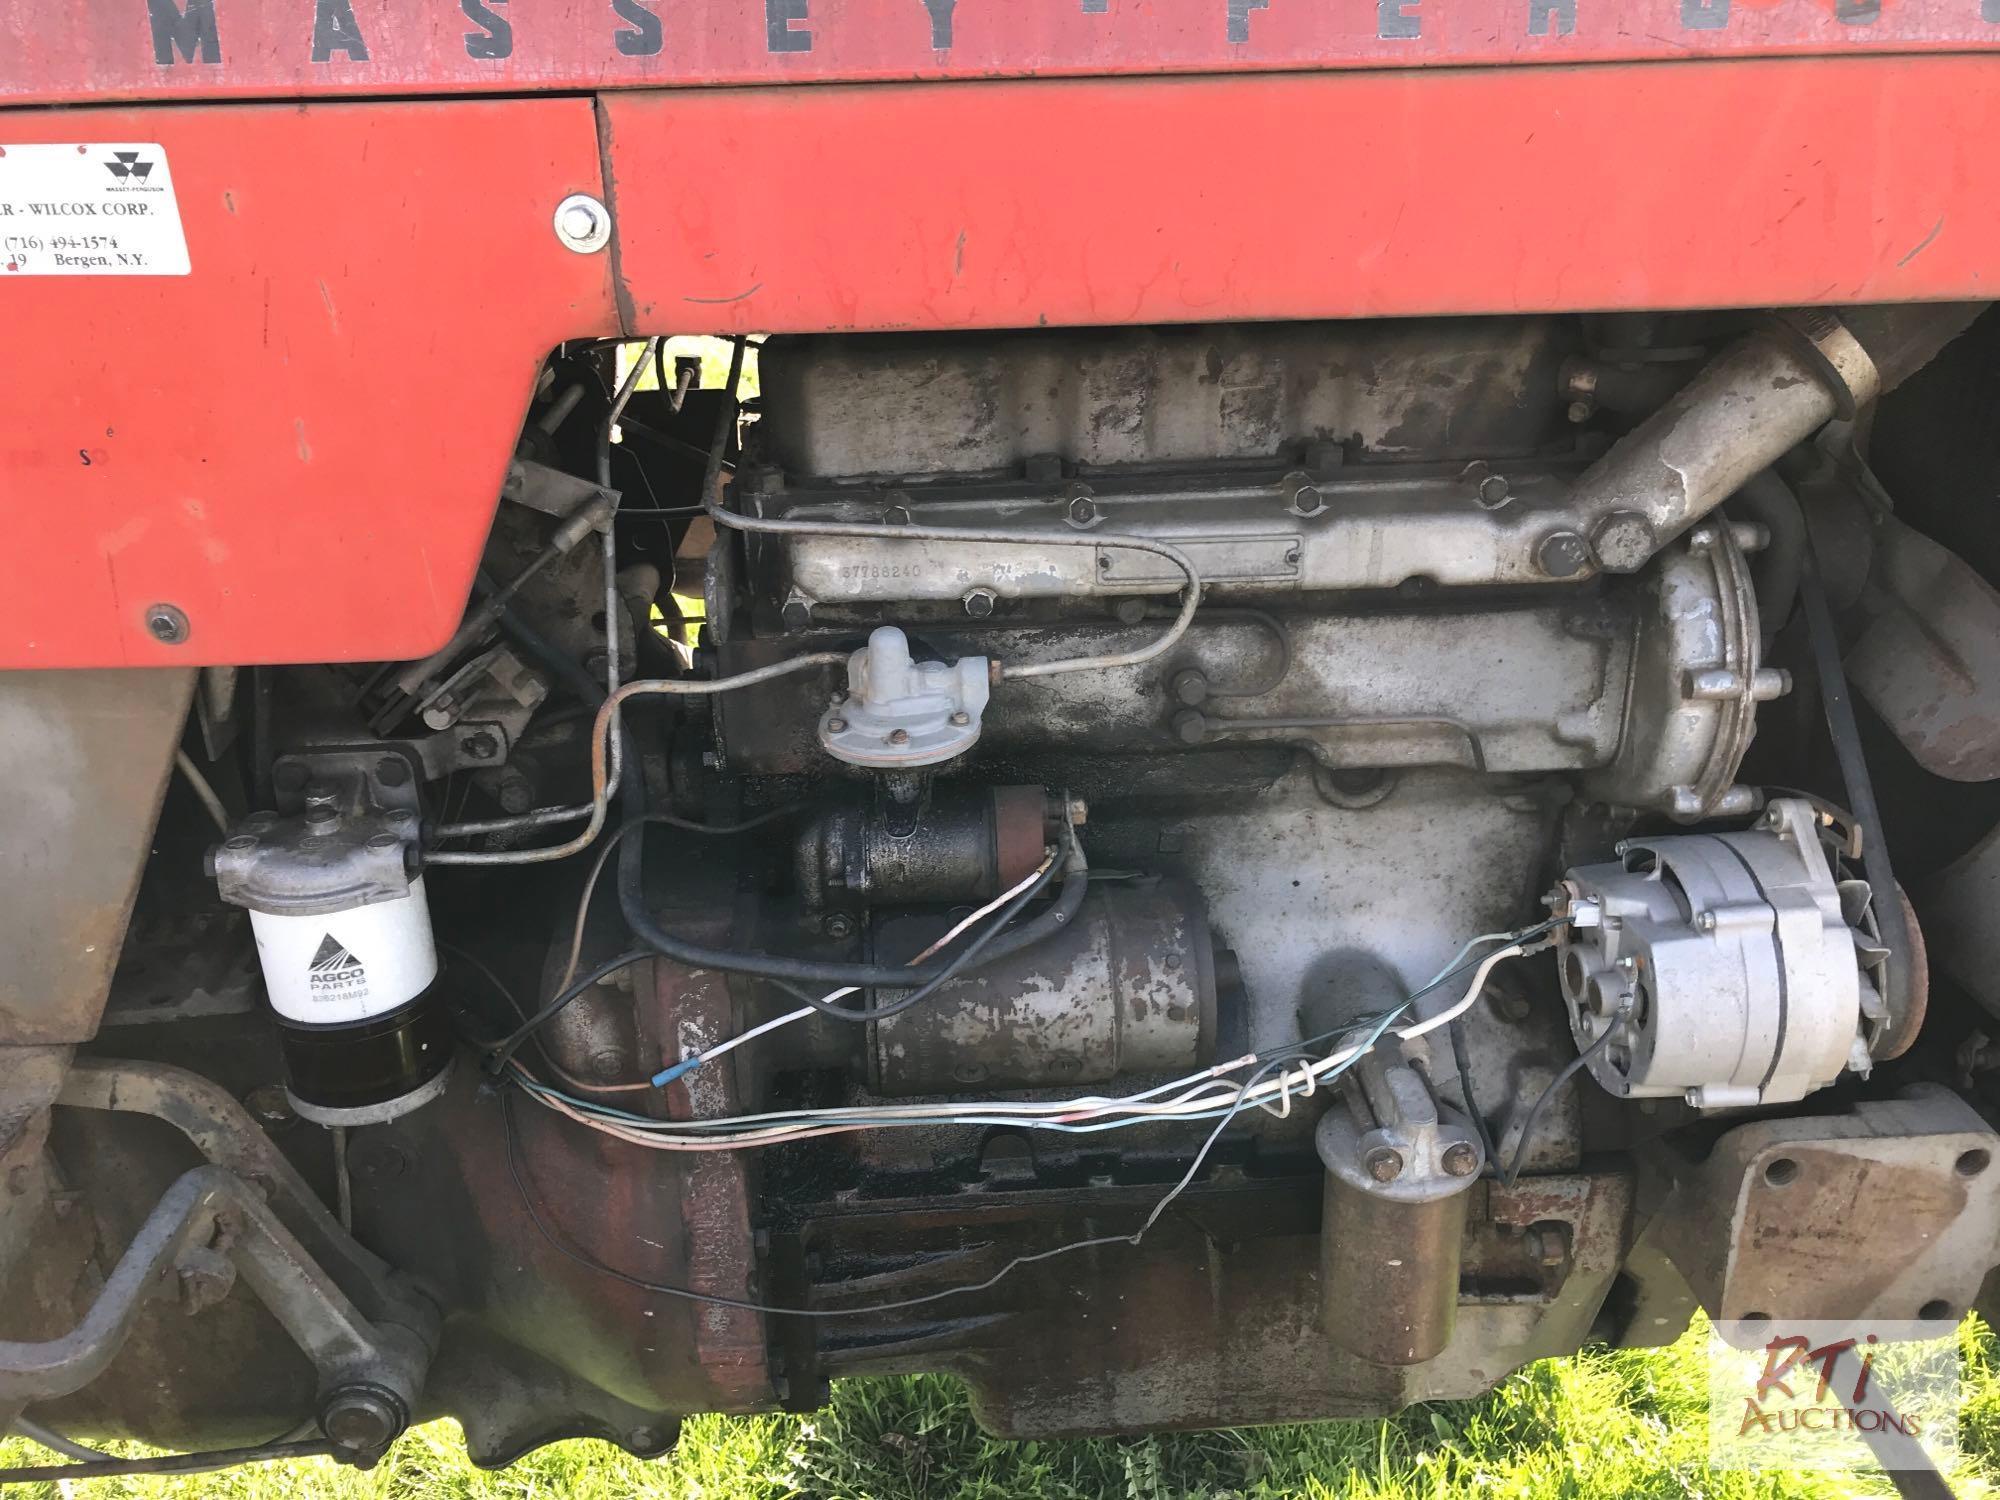 Massey Ferguson 165 diesel tractor with lift arms, draw bar, PTO. 6382 hrs